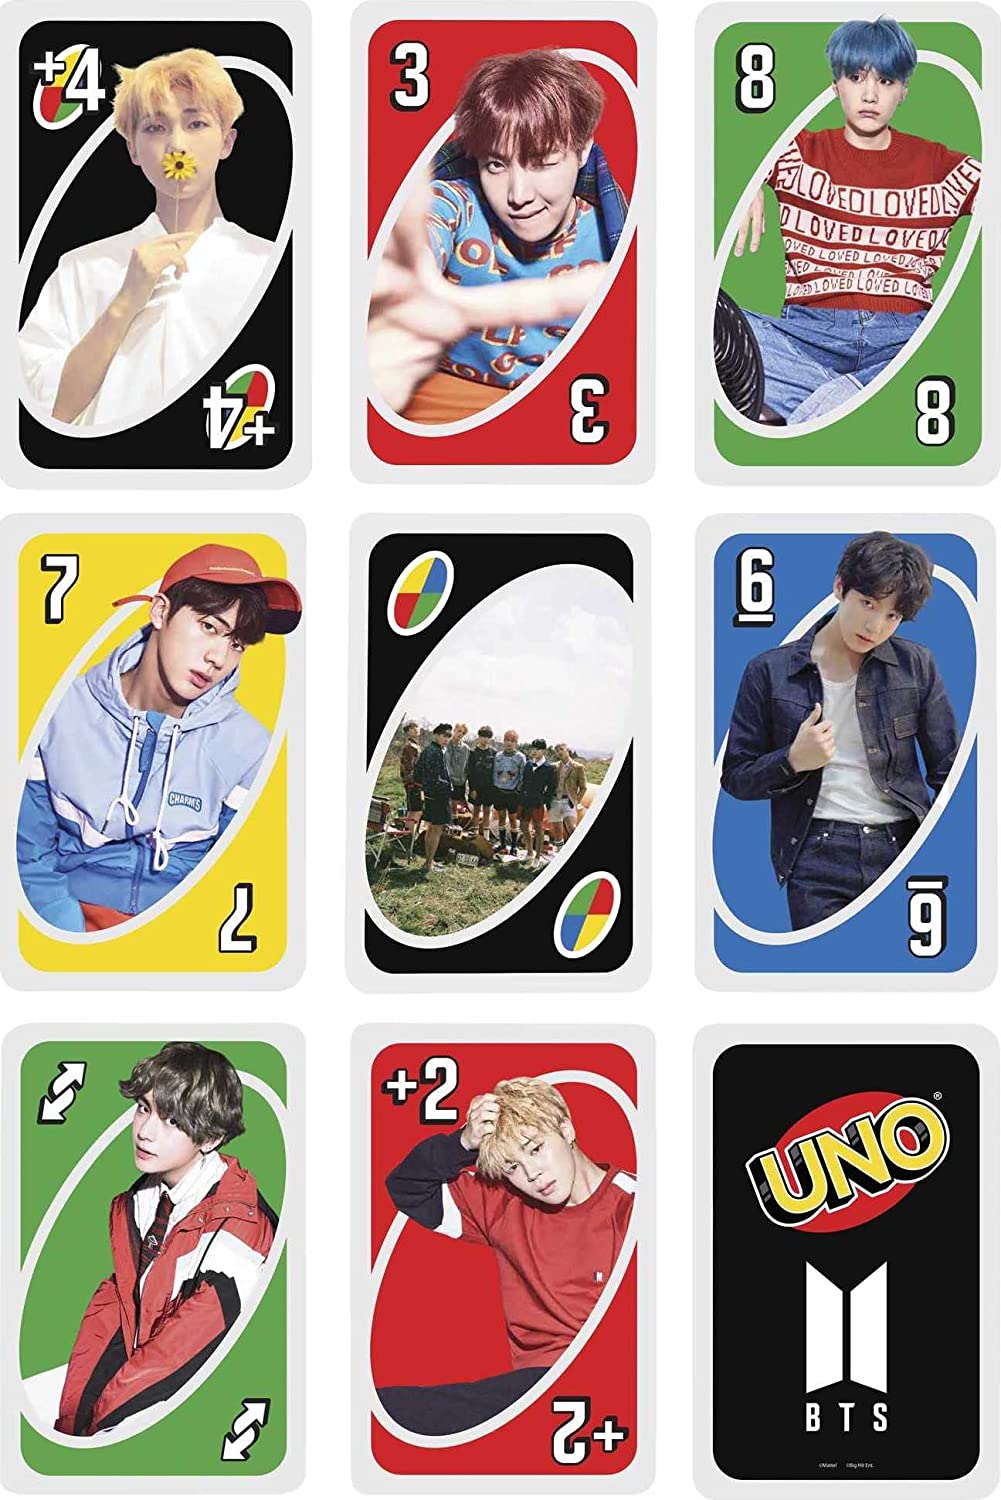 Giant UNO BTS Card Game - with 108 Cards Based on BTS Global Superstars